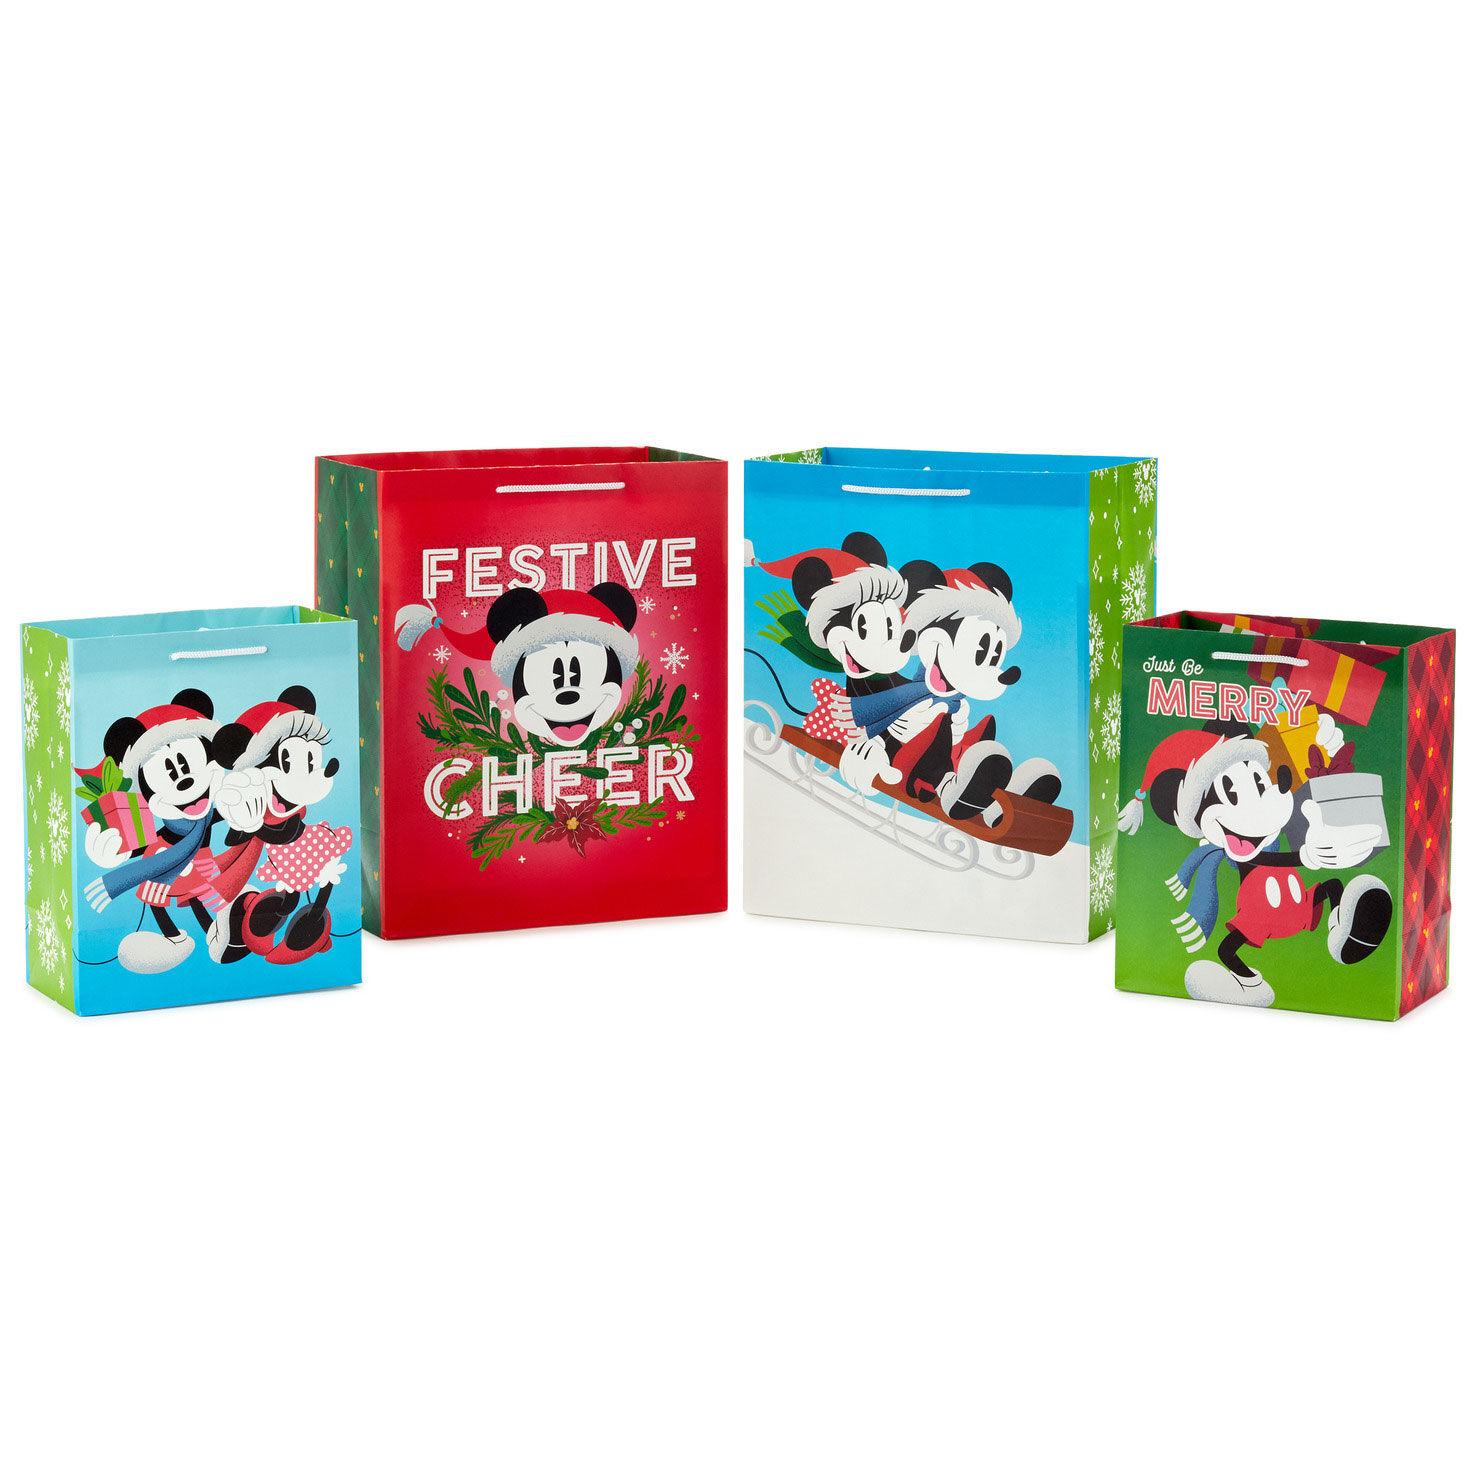 https://www.hallmark.com/dw/image/v2/AALB_PRD/on/demandware.static/-/Sites-hallmark-master/default/dw955b9a25/images/finished-goods/products/5XGB1445/Assorted-Mickey-and-Minnie-Christmas-Gift-Bags_5XGB1445_01.jpg?sfrm=jpg